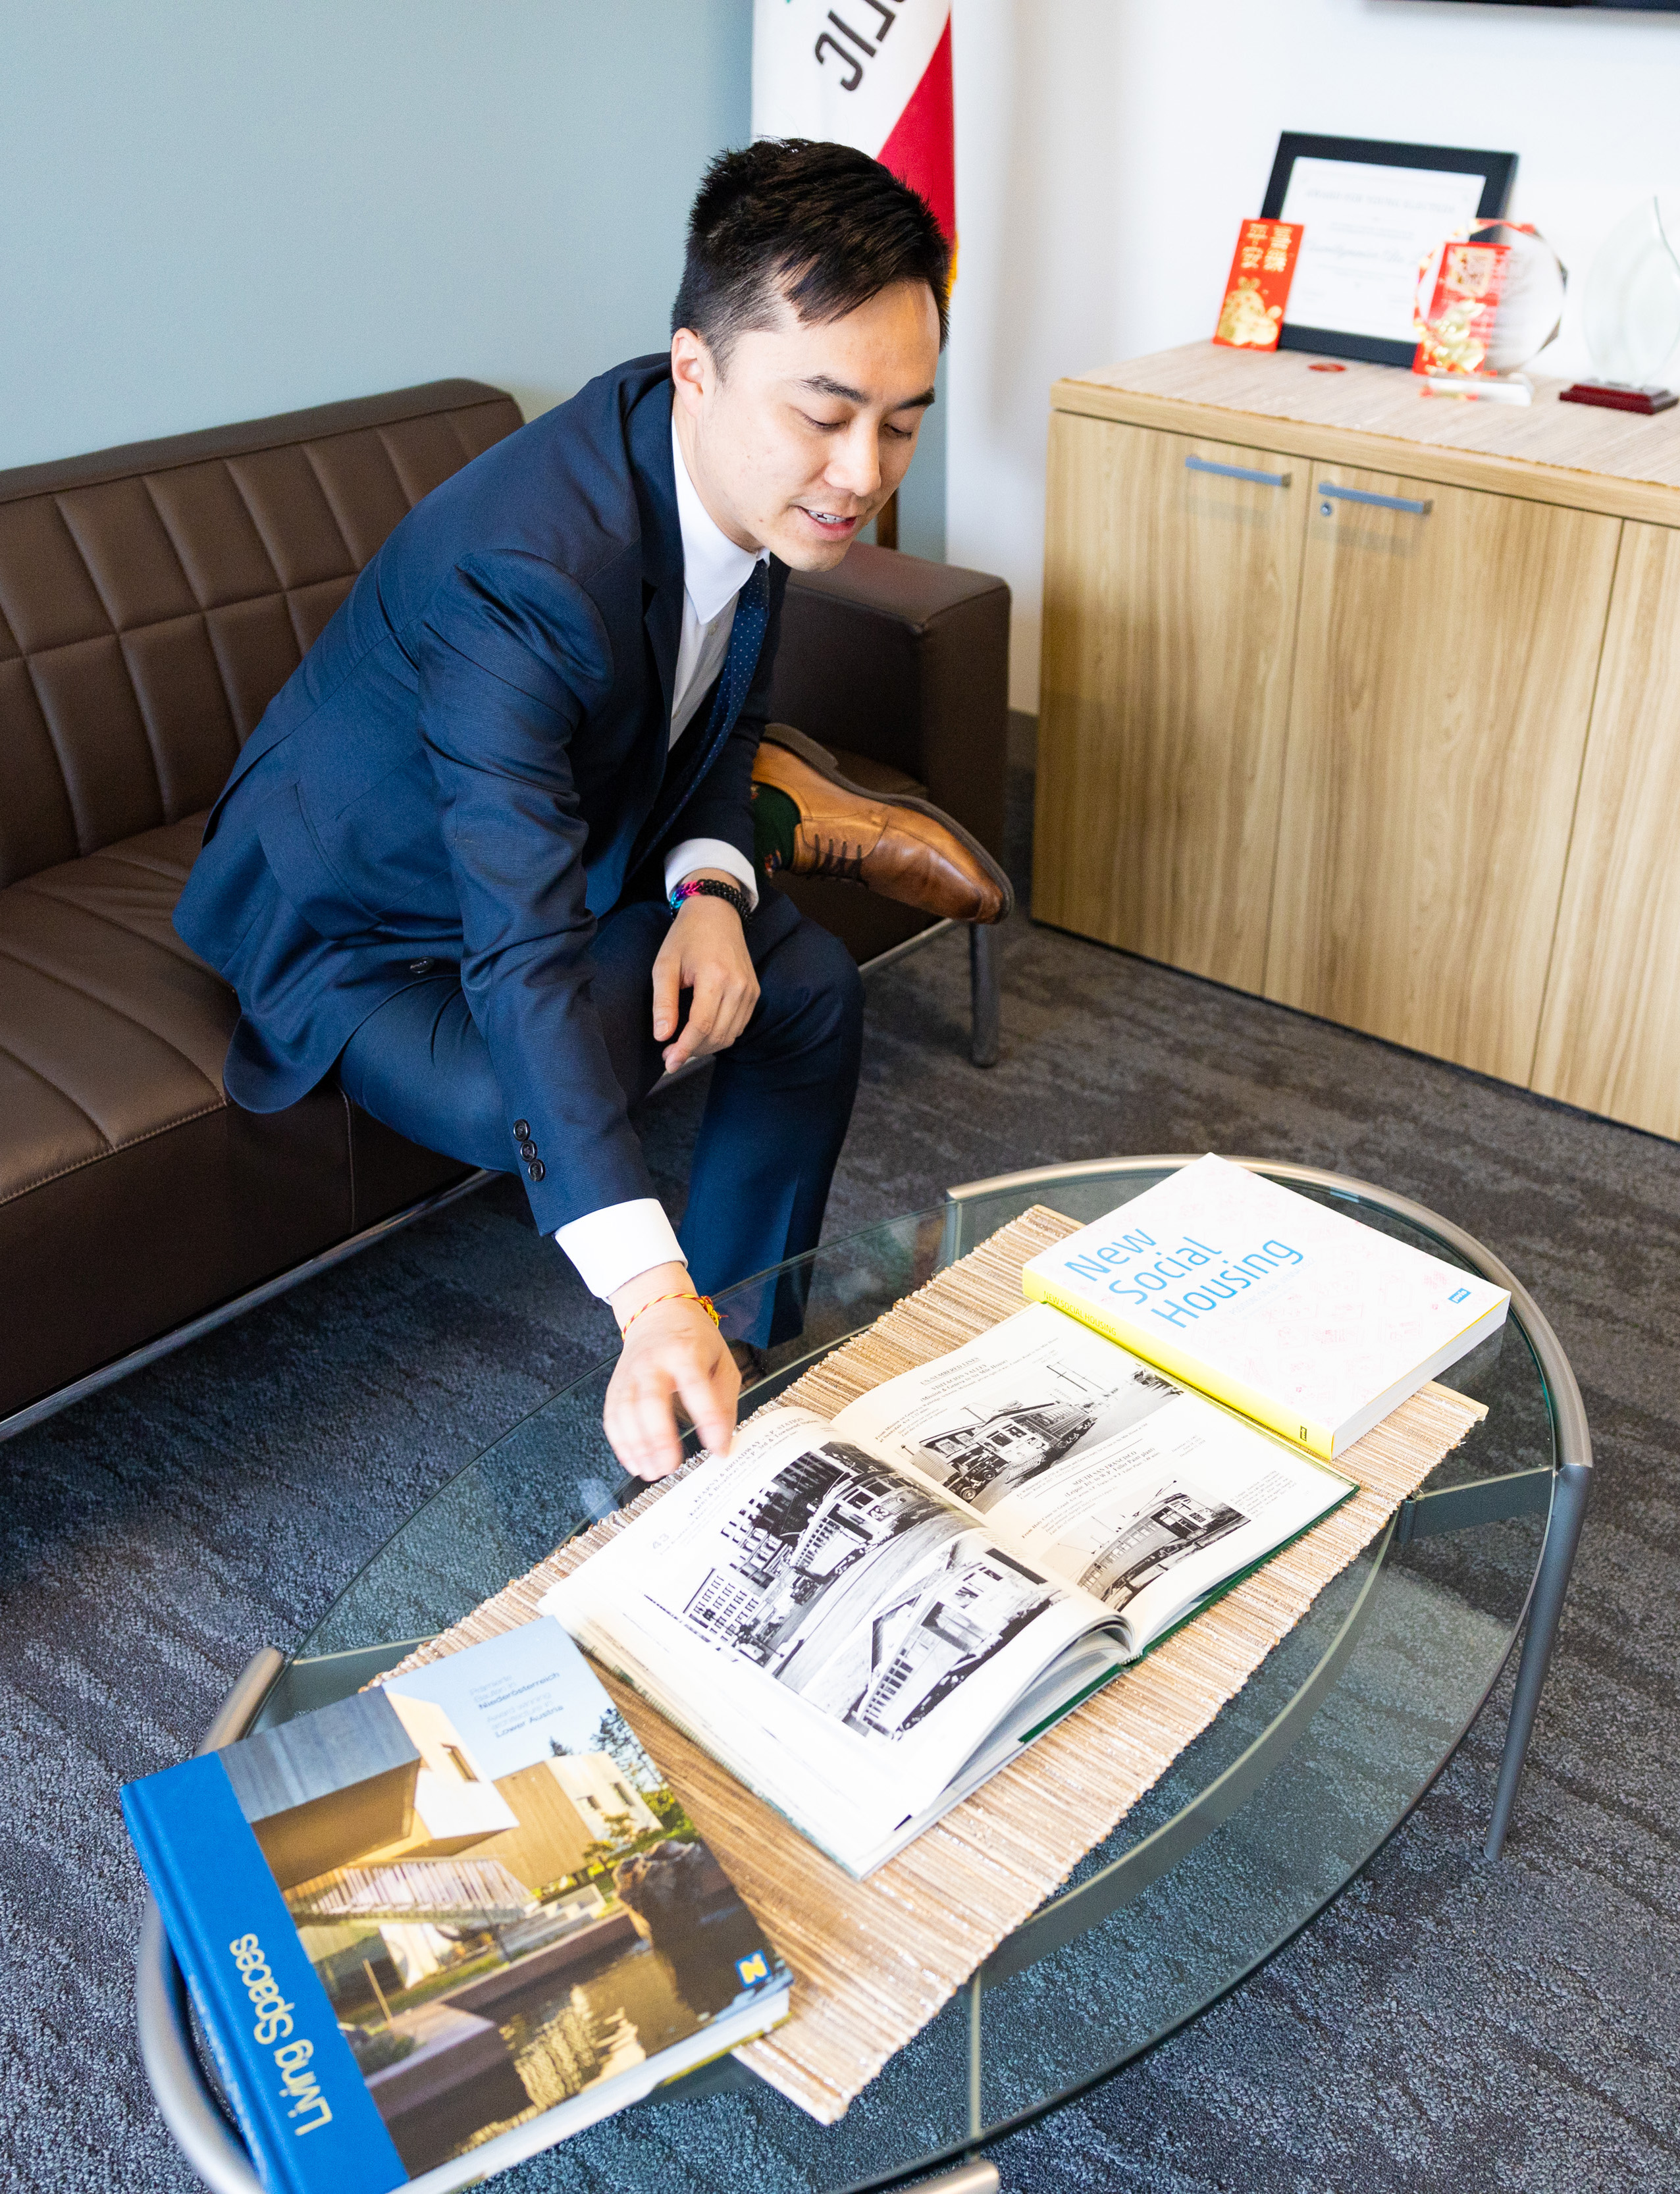 A man in a suit leans over a glass table, examining open magazines in an office setting.